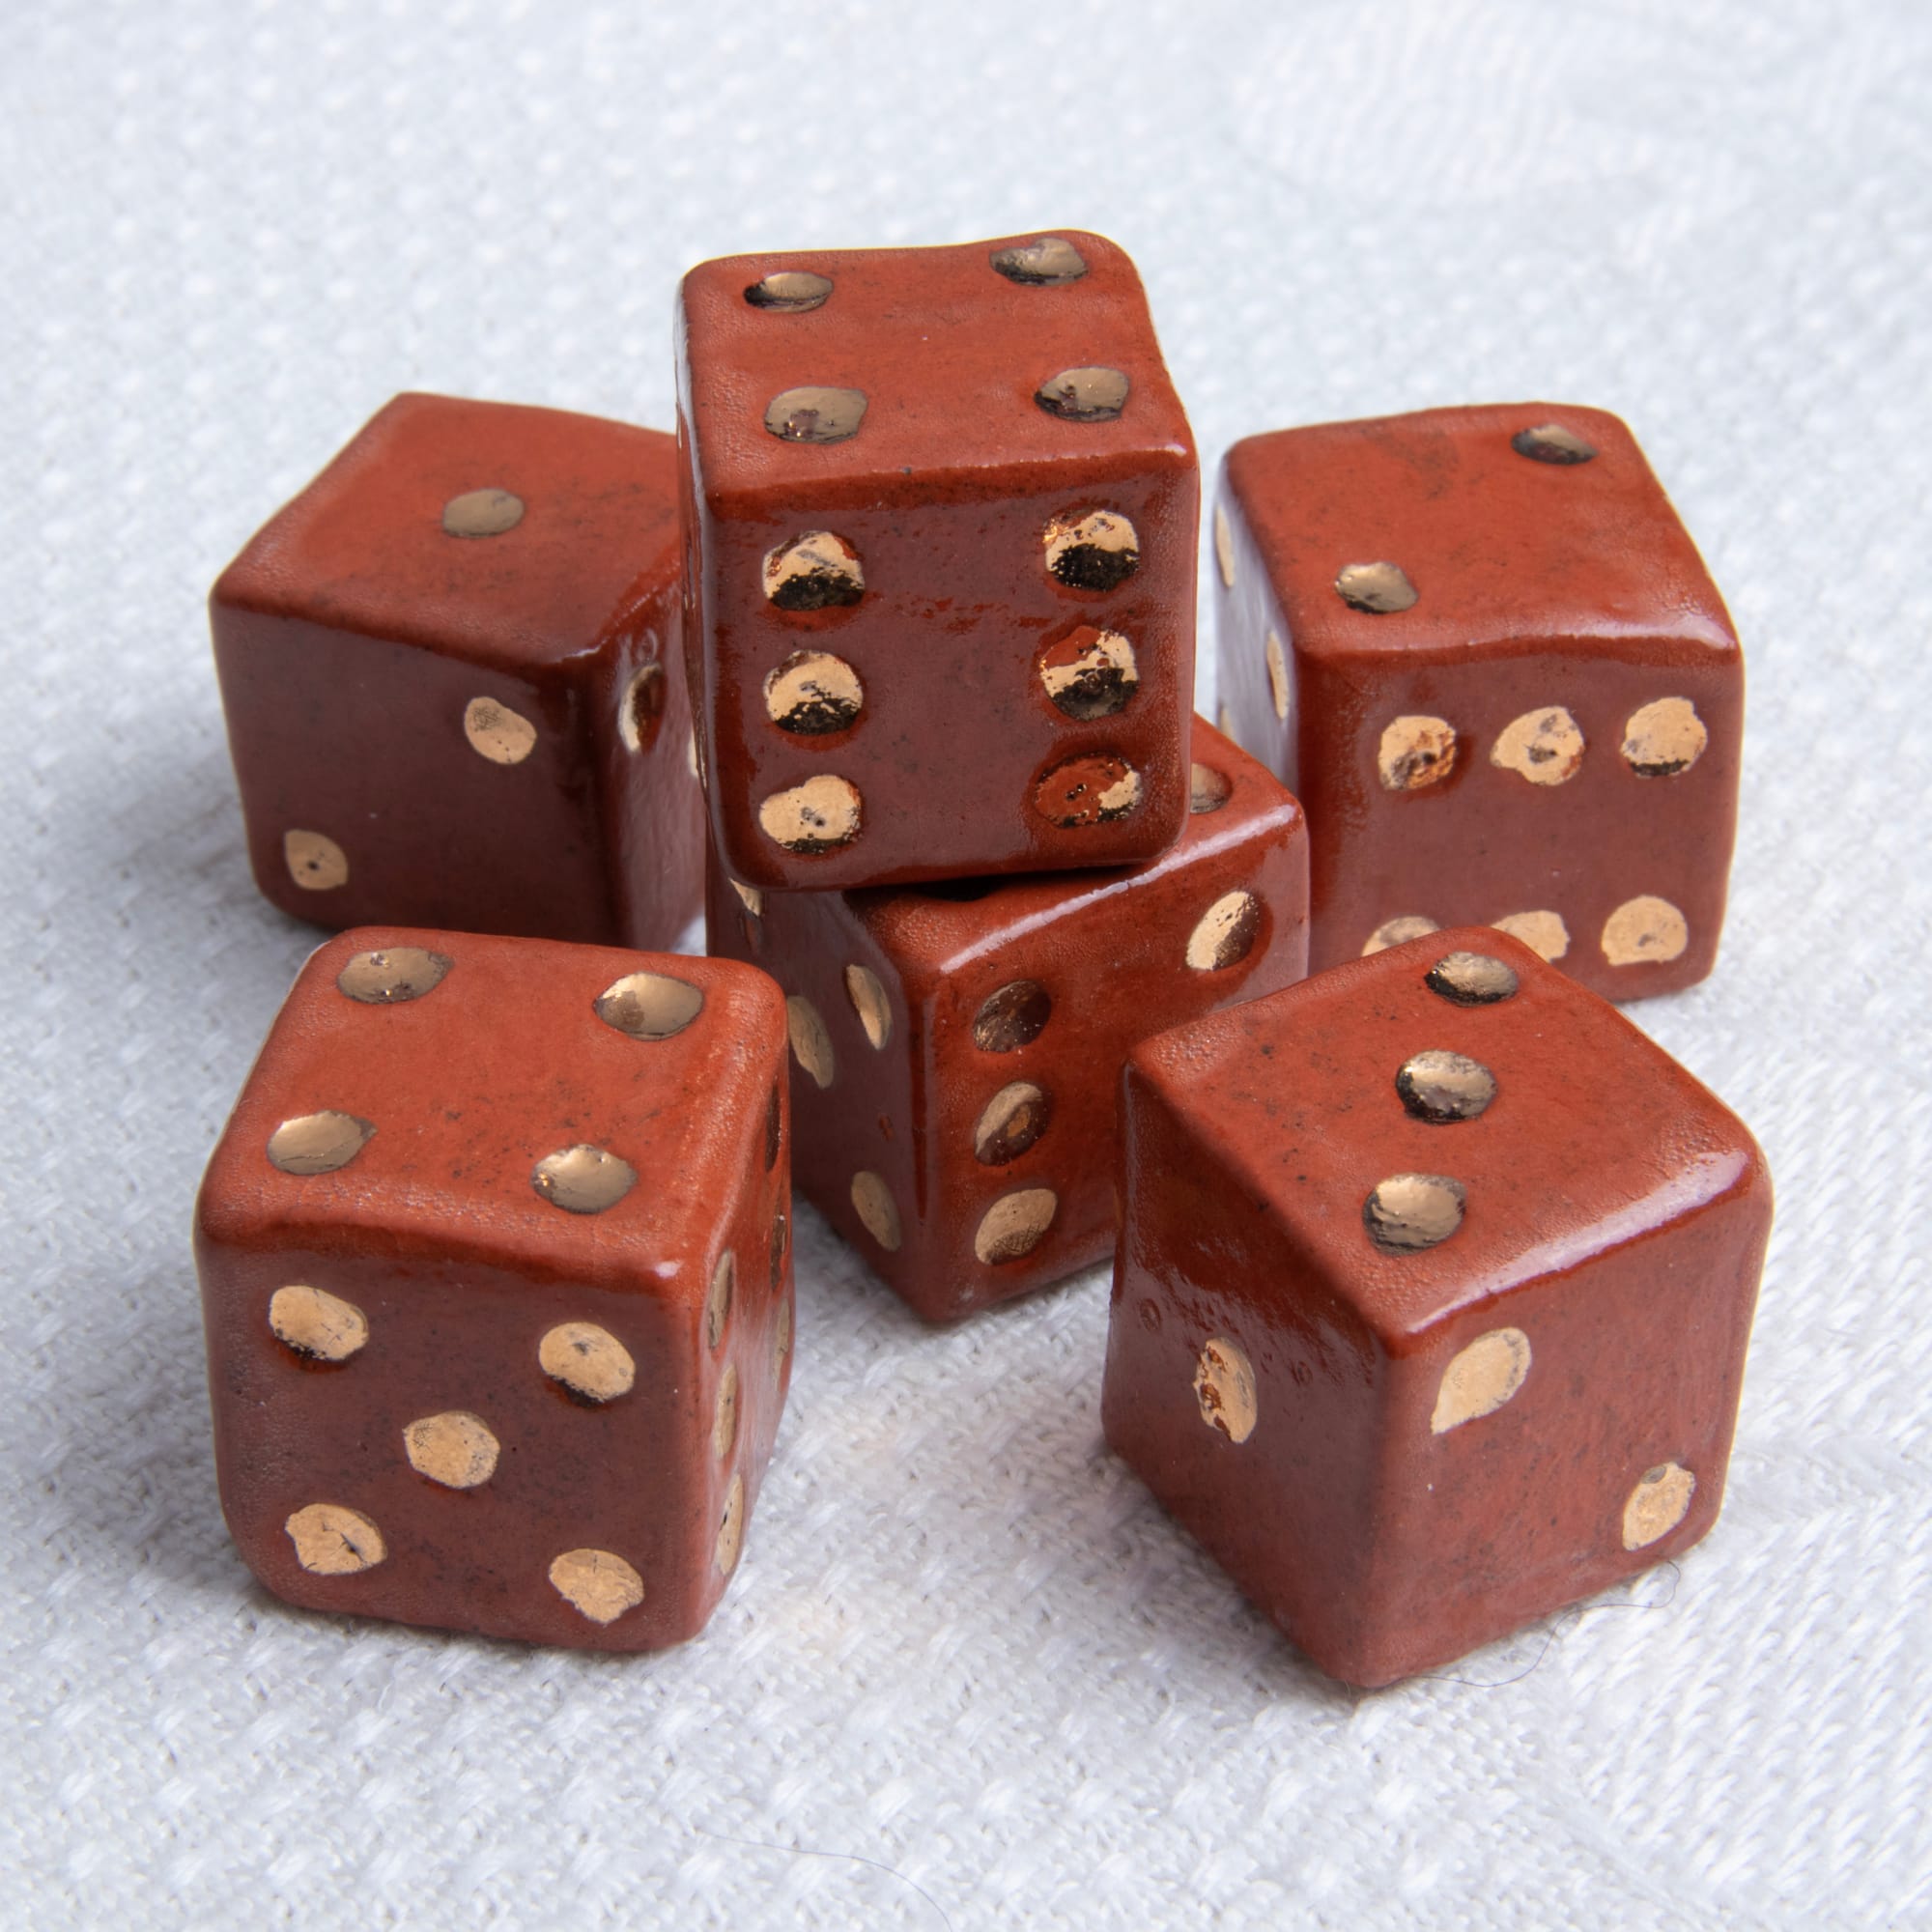 Timeless Treasures: your next dice set could be... Ceramic?